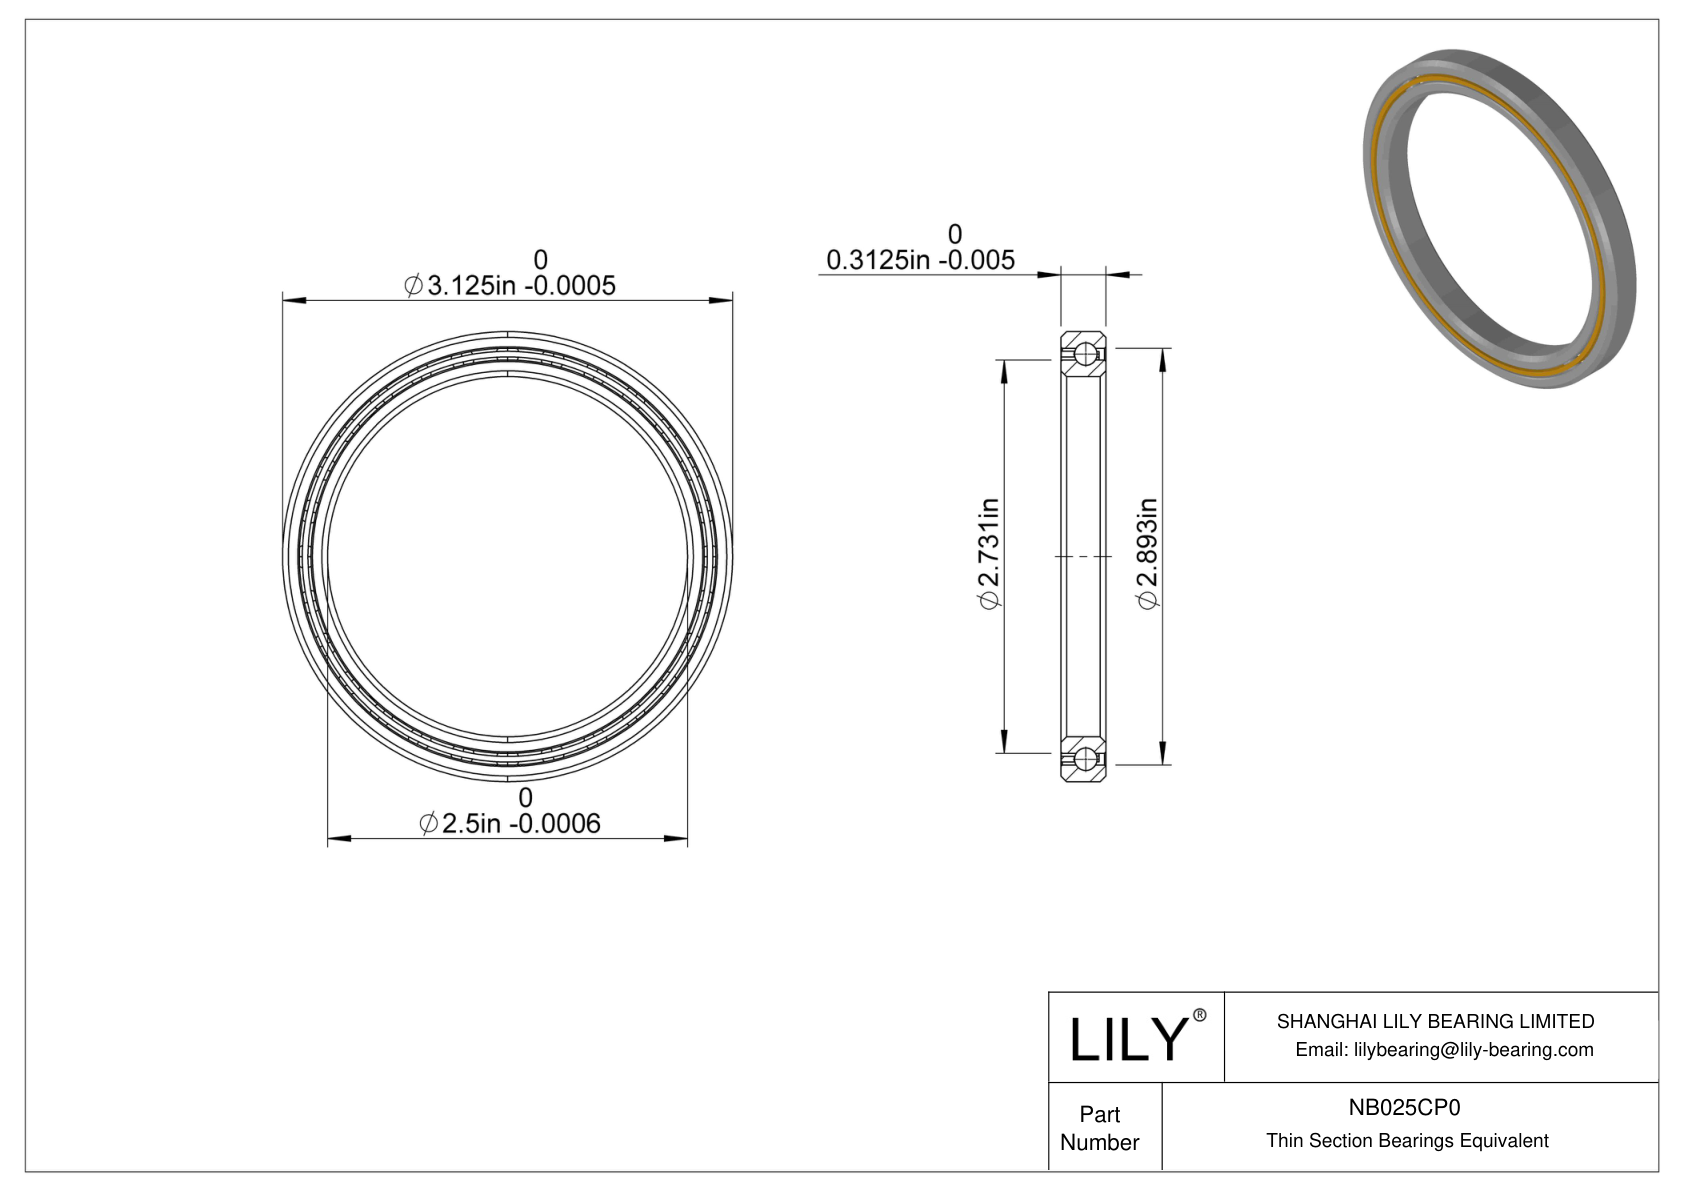 NB025CP0 Constant Section (CS) Bearings cad drawing